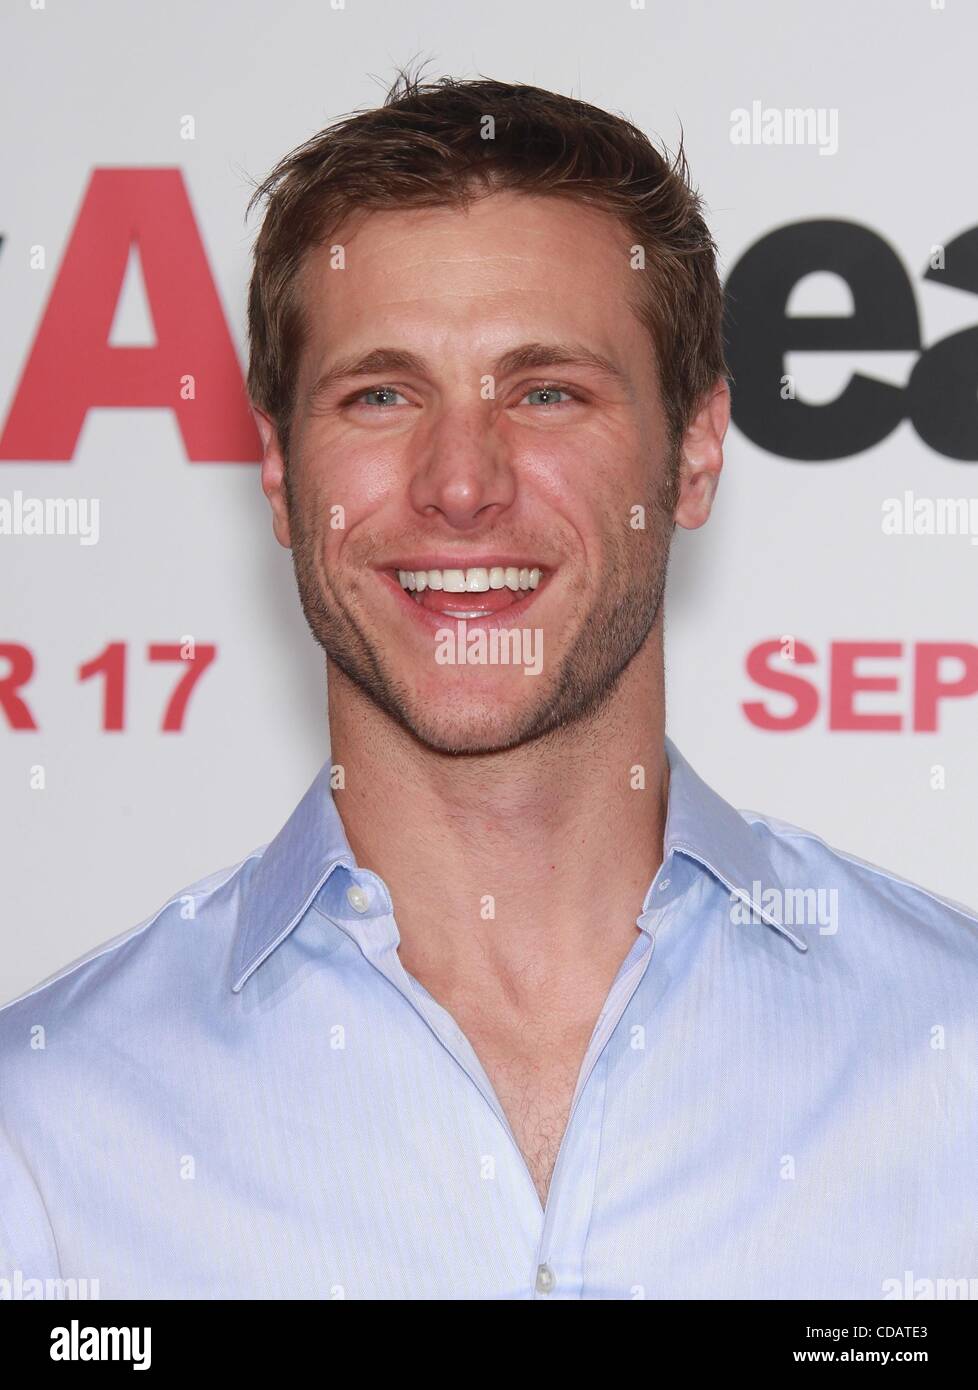 Sep 13, 2010 - Hollywood, California, USA - Actor JAKE PAVELKA arriving to the 'Easy A' Los Angeles Premiere held at the Mann Chinese Theatre. (Credit Image: © Lisa O'Connor/ZUMApress.com) Stock Photo